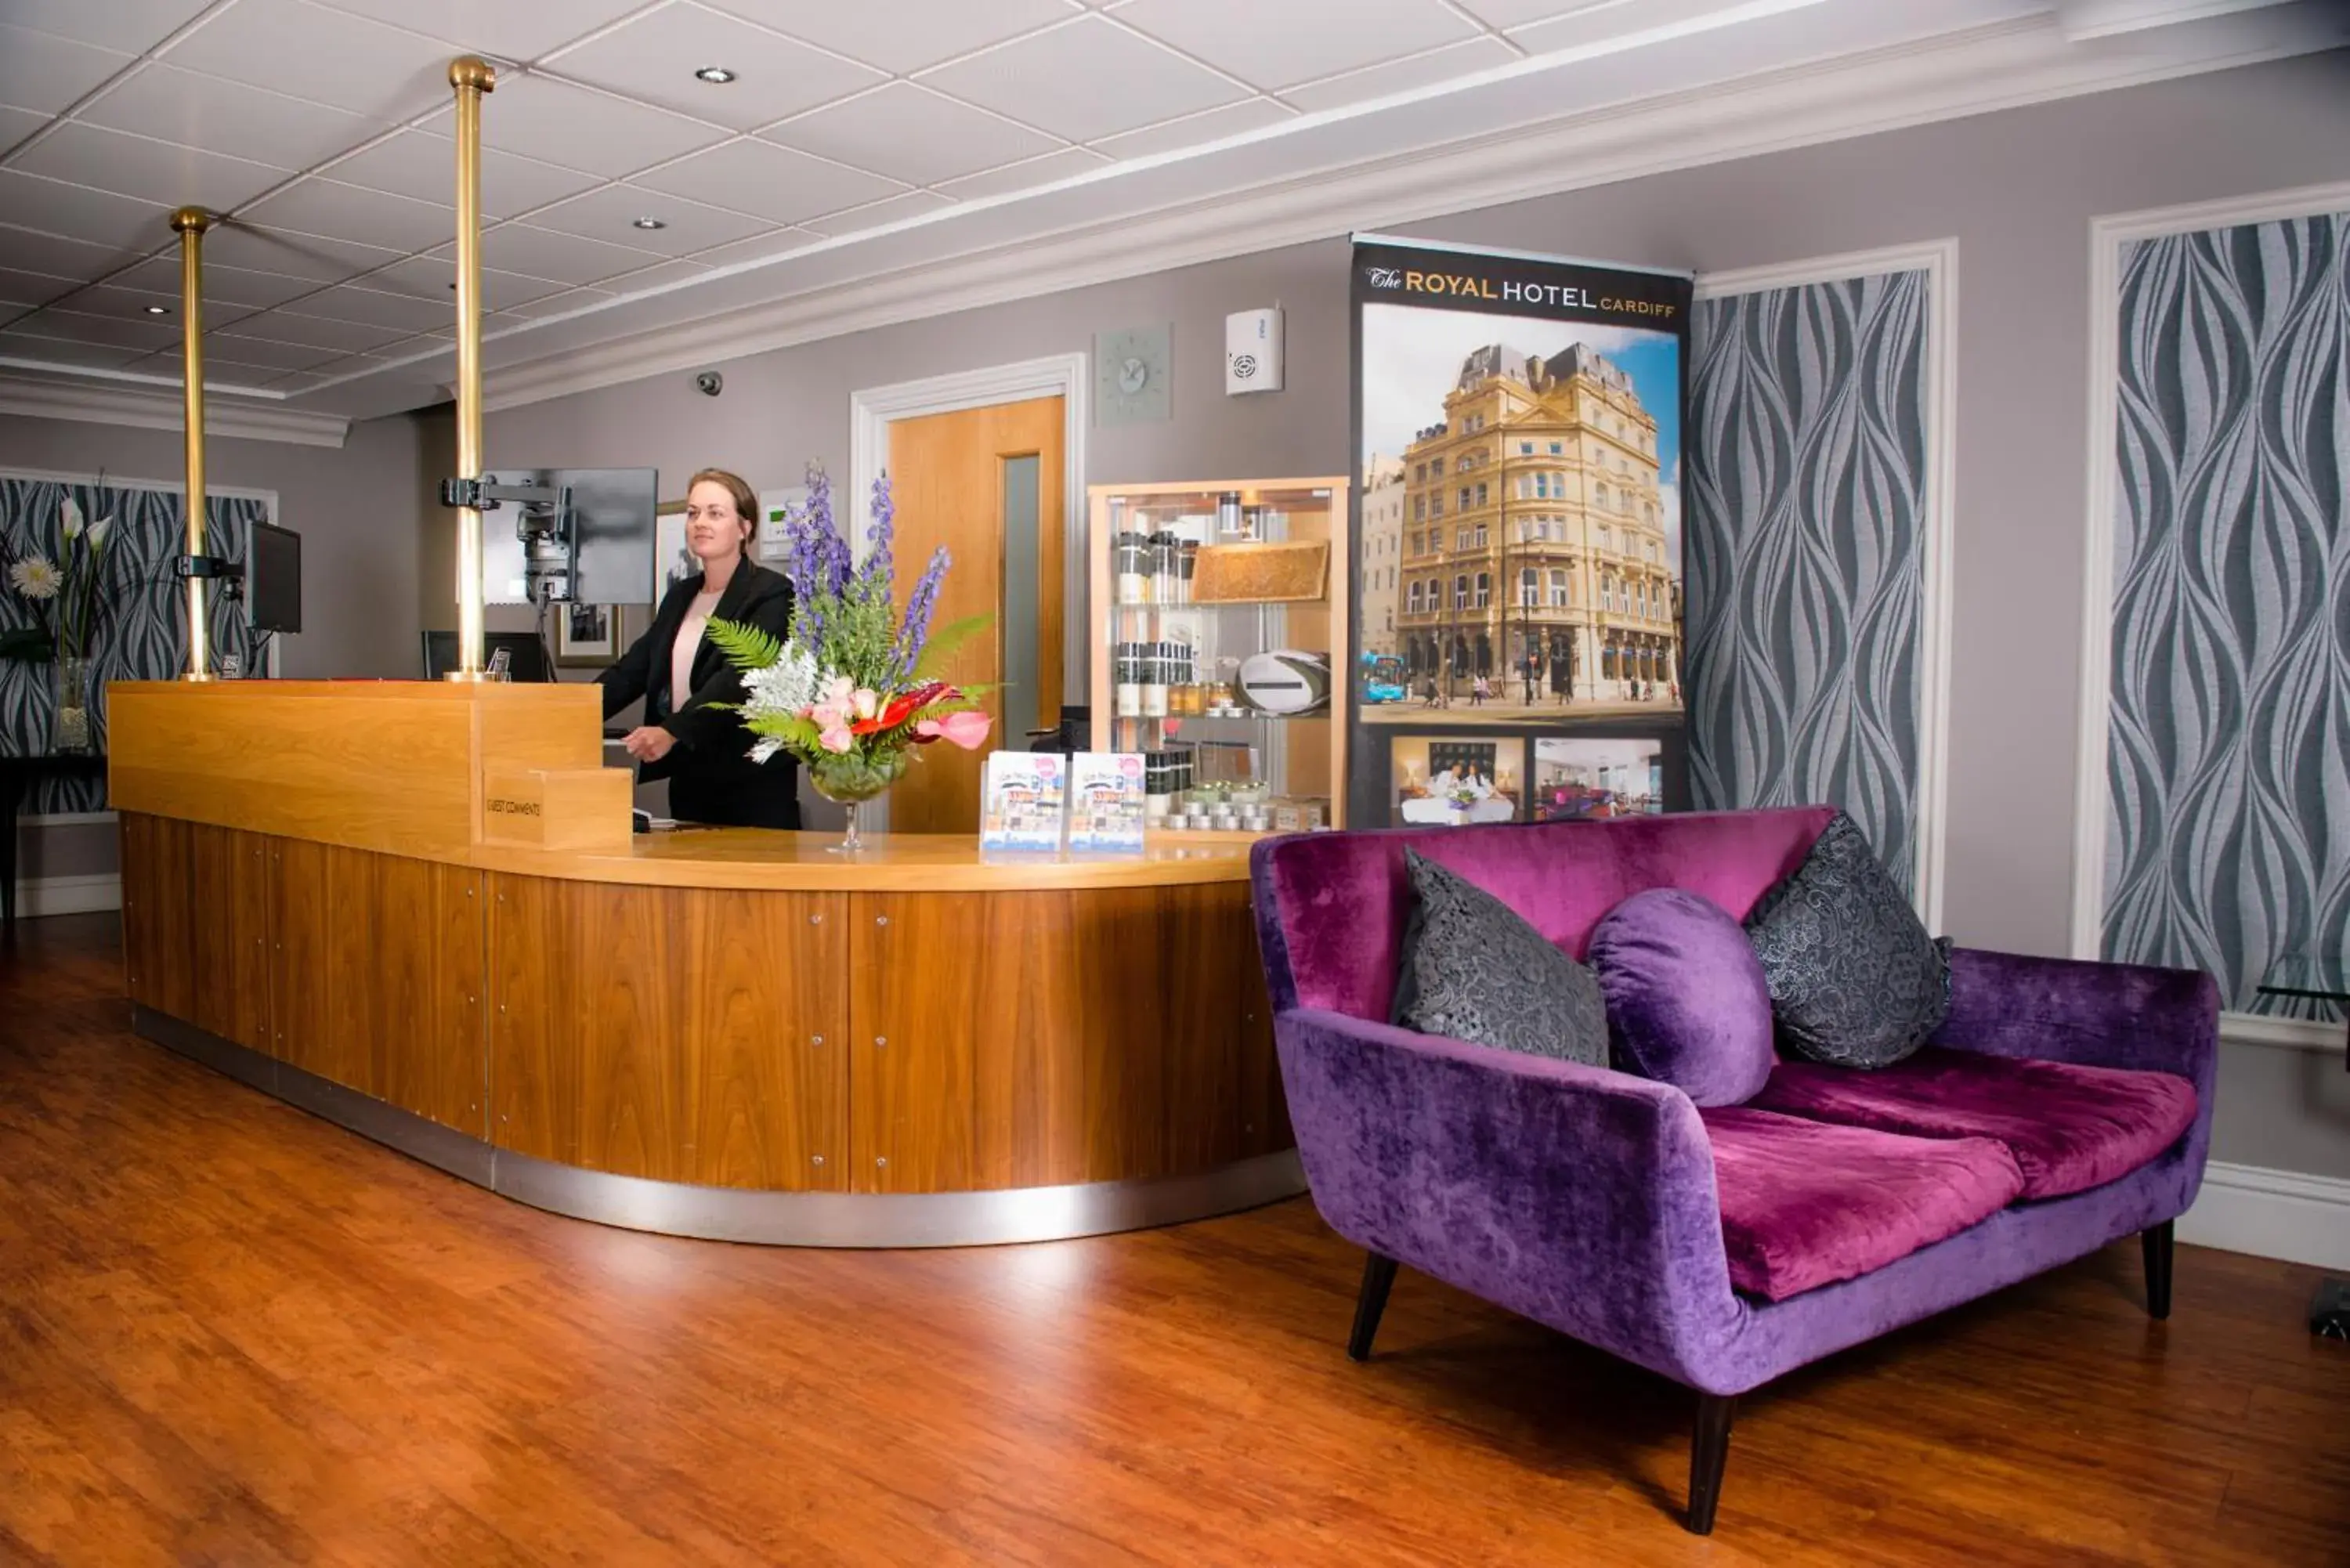 Lobby or reception in The Royal Hotel Cardiff